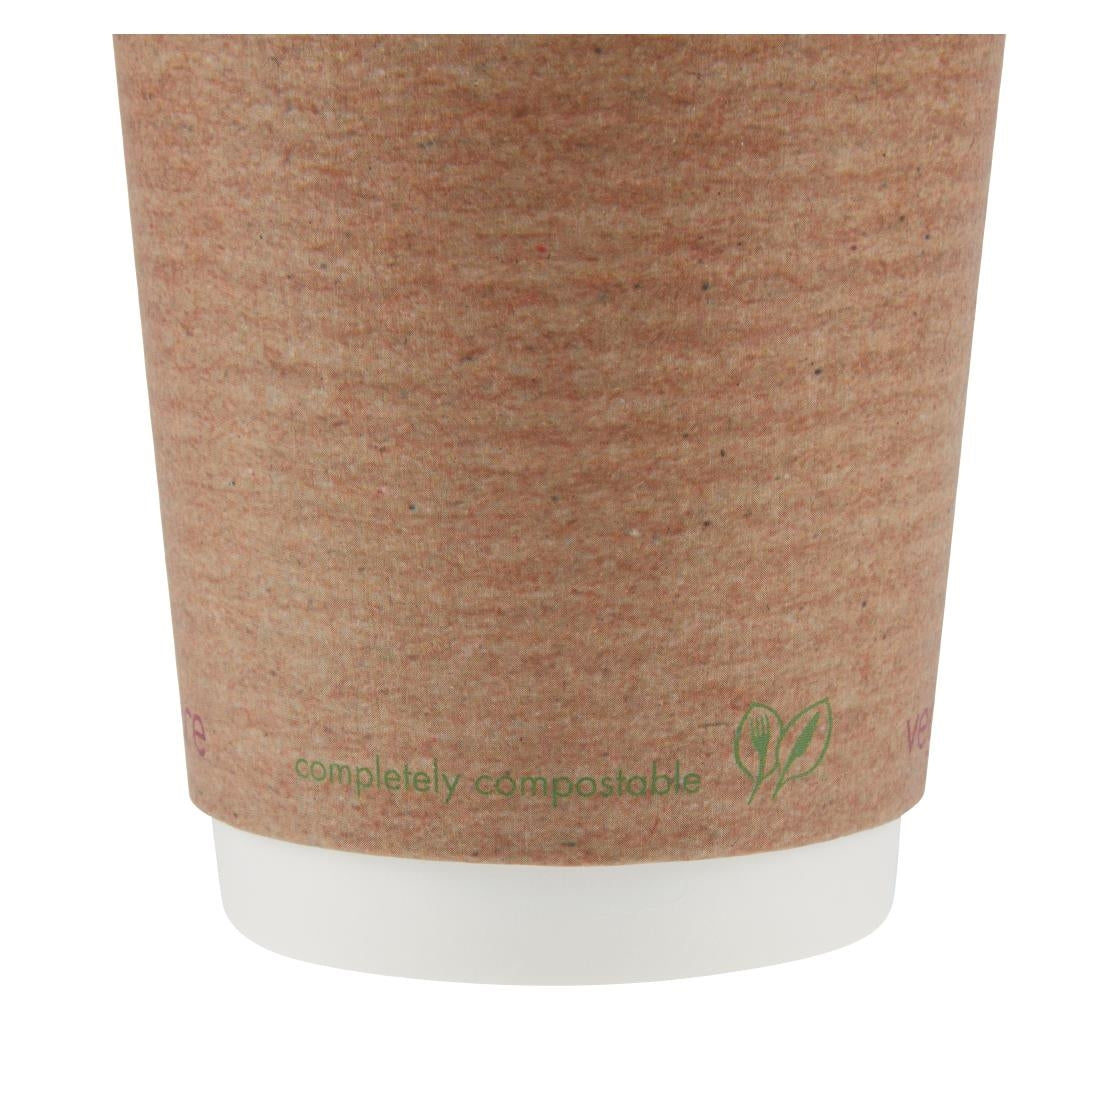 GH021 Vegware Compostable Coffee Cups Double Wall 340ml / 12oz (Pack of 500)